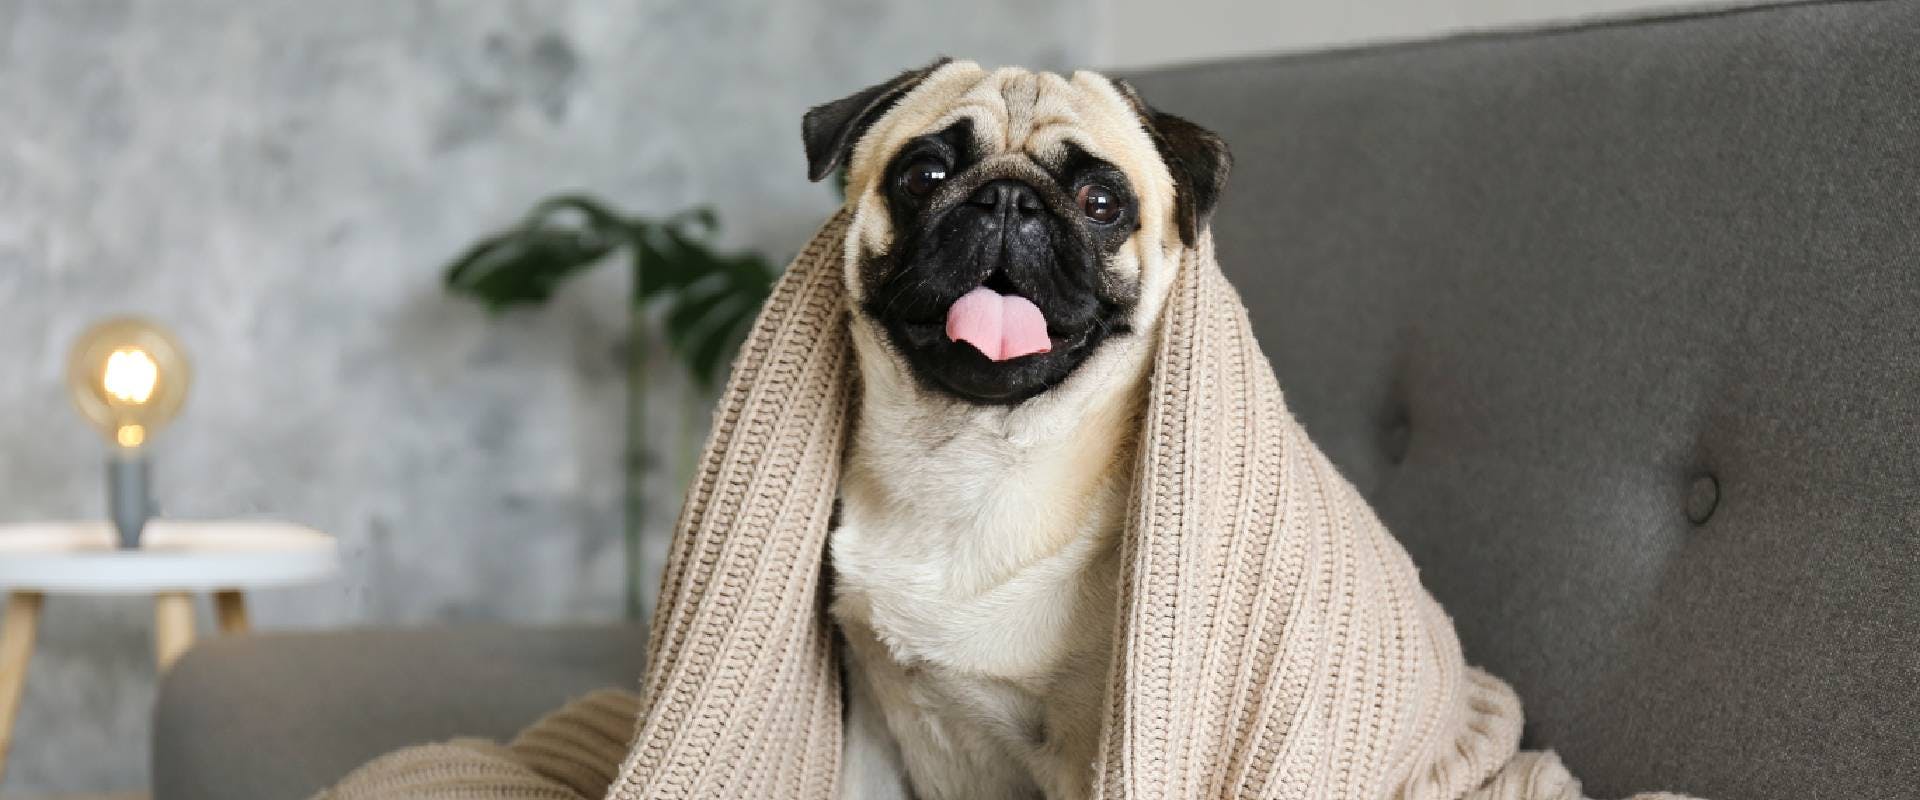 Pug in a blanket on the sofa